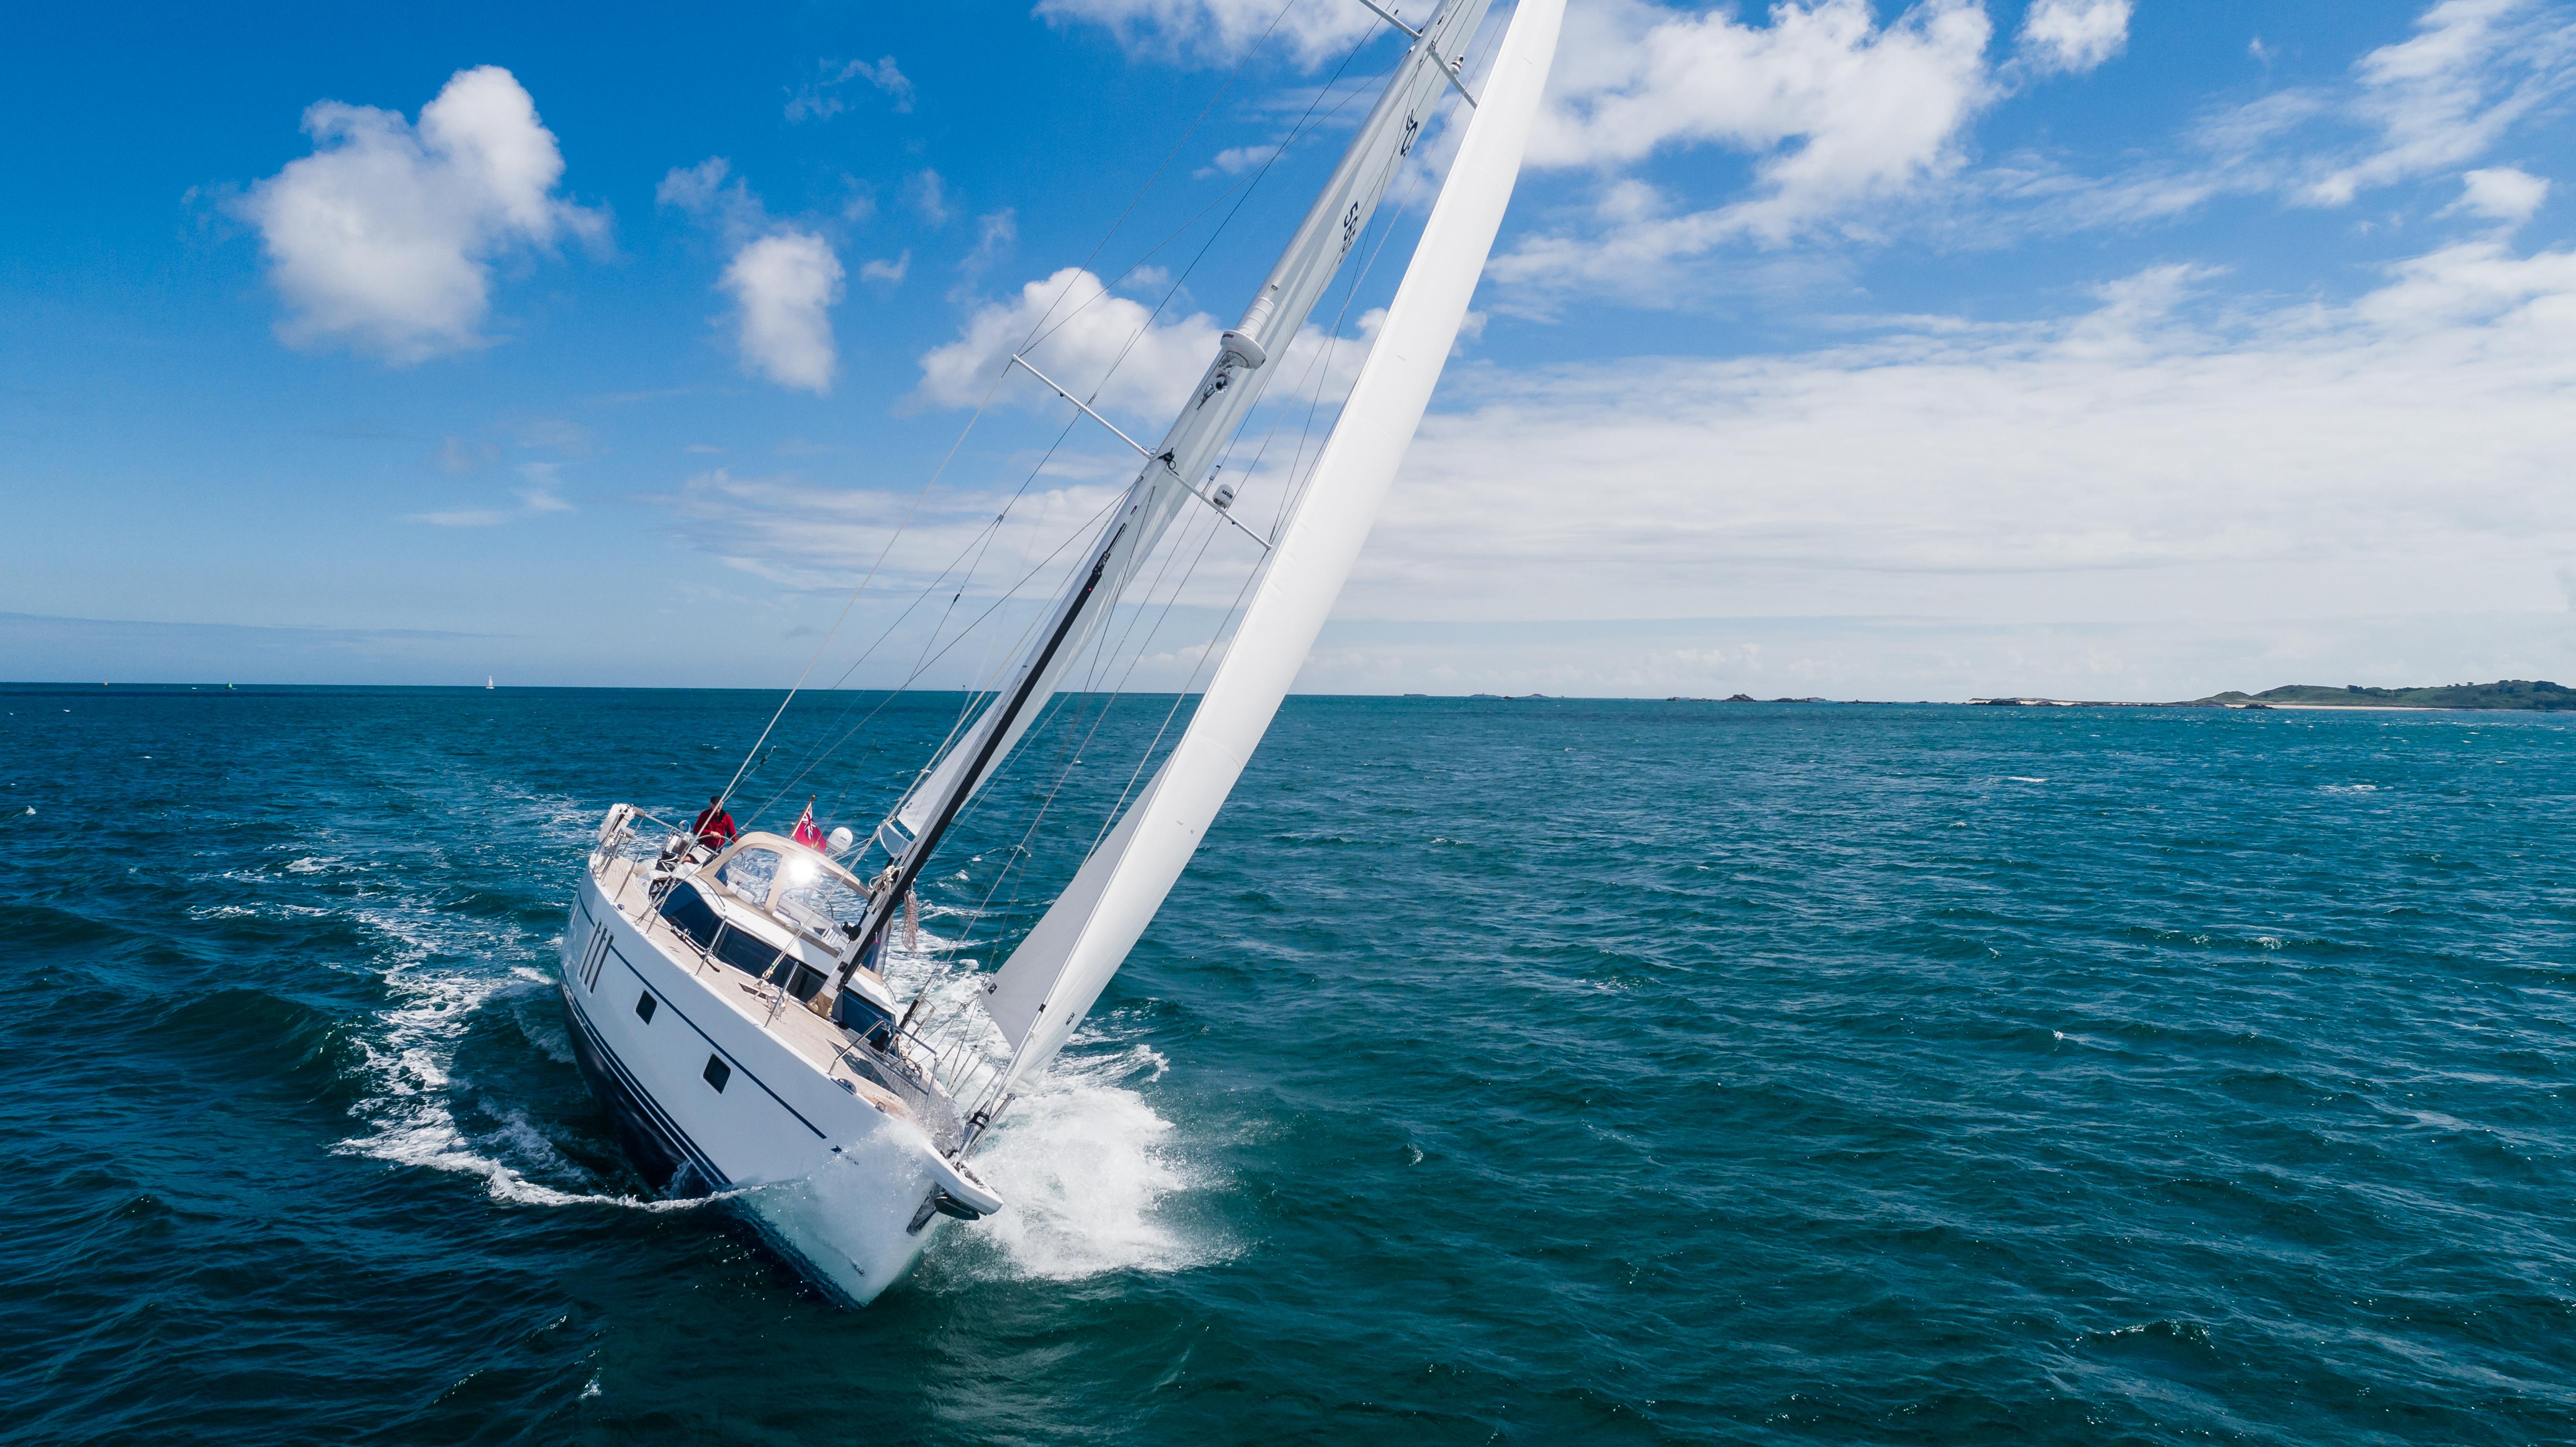 oyster yachts rally